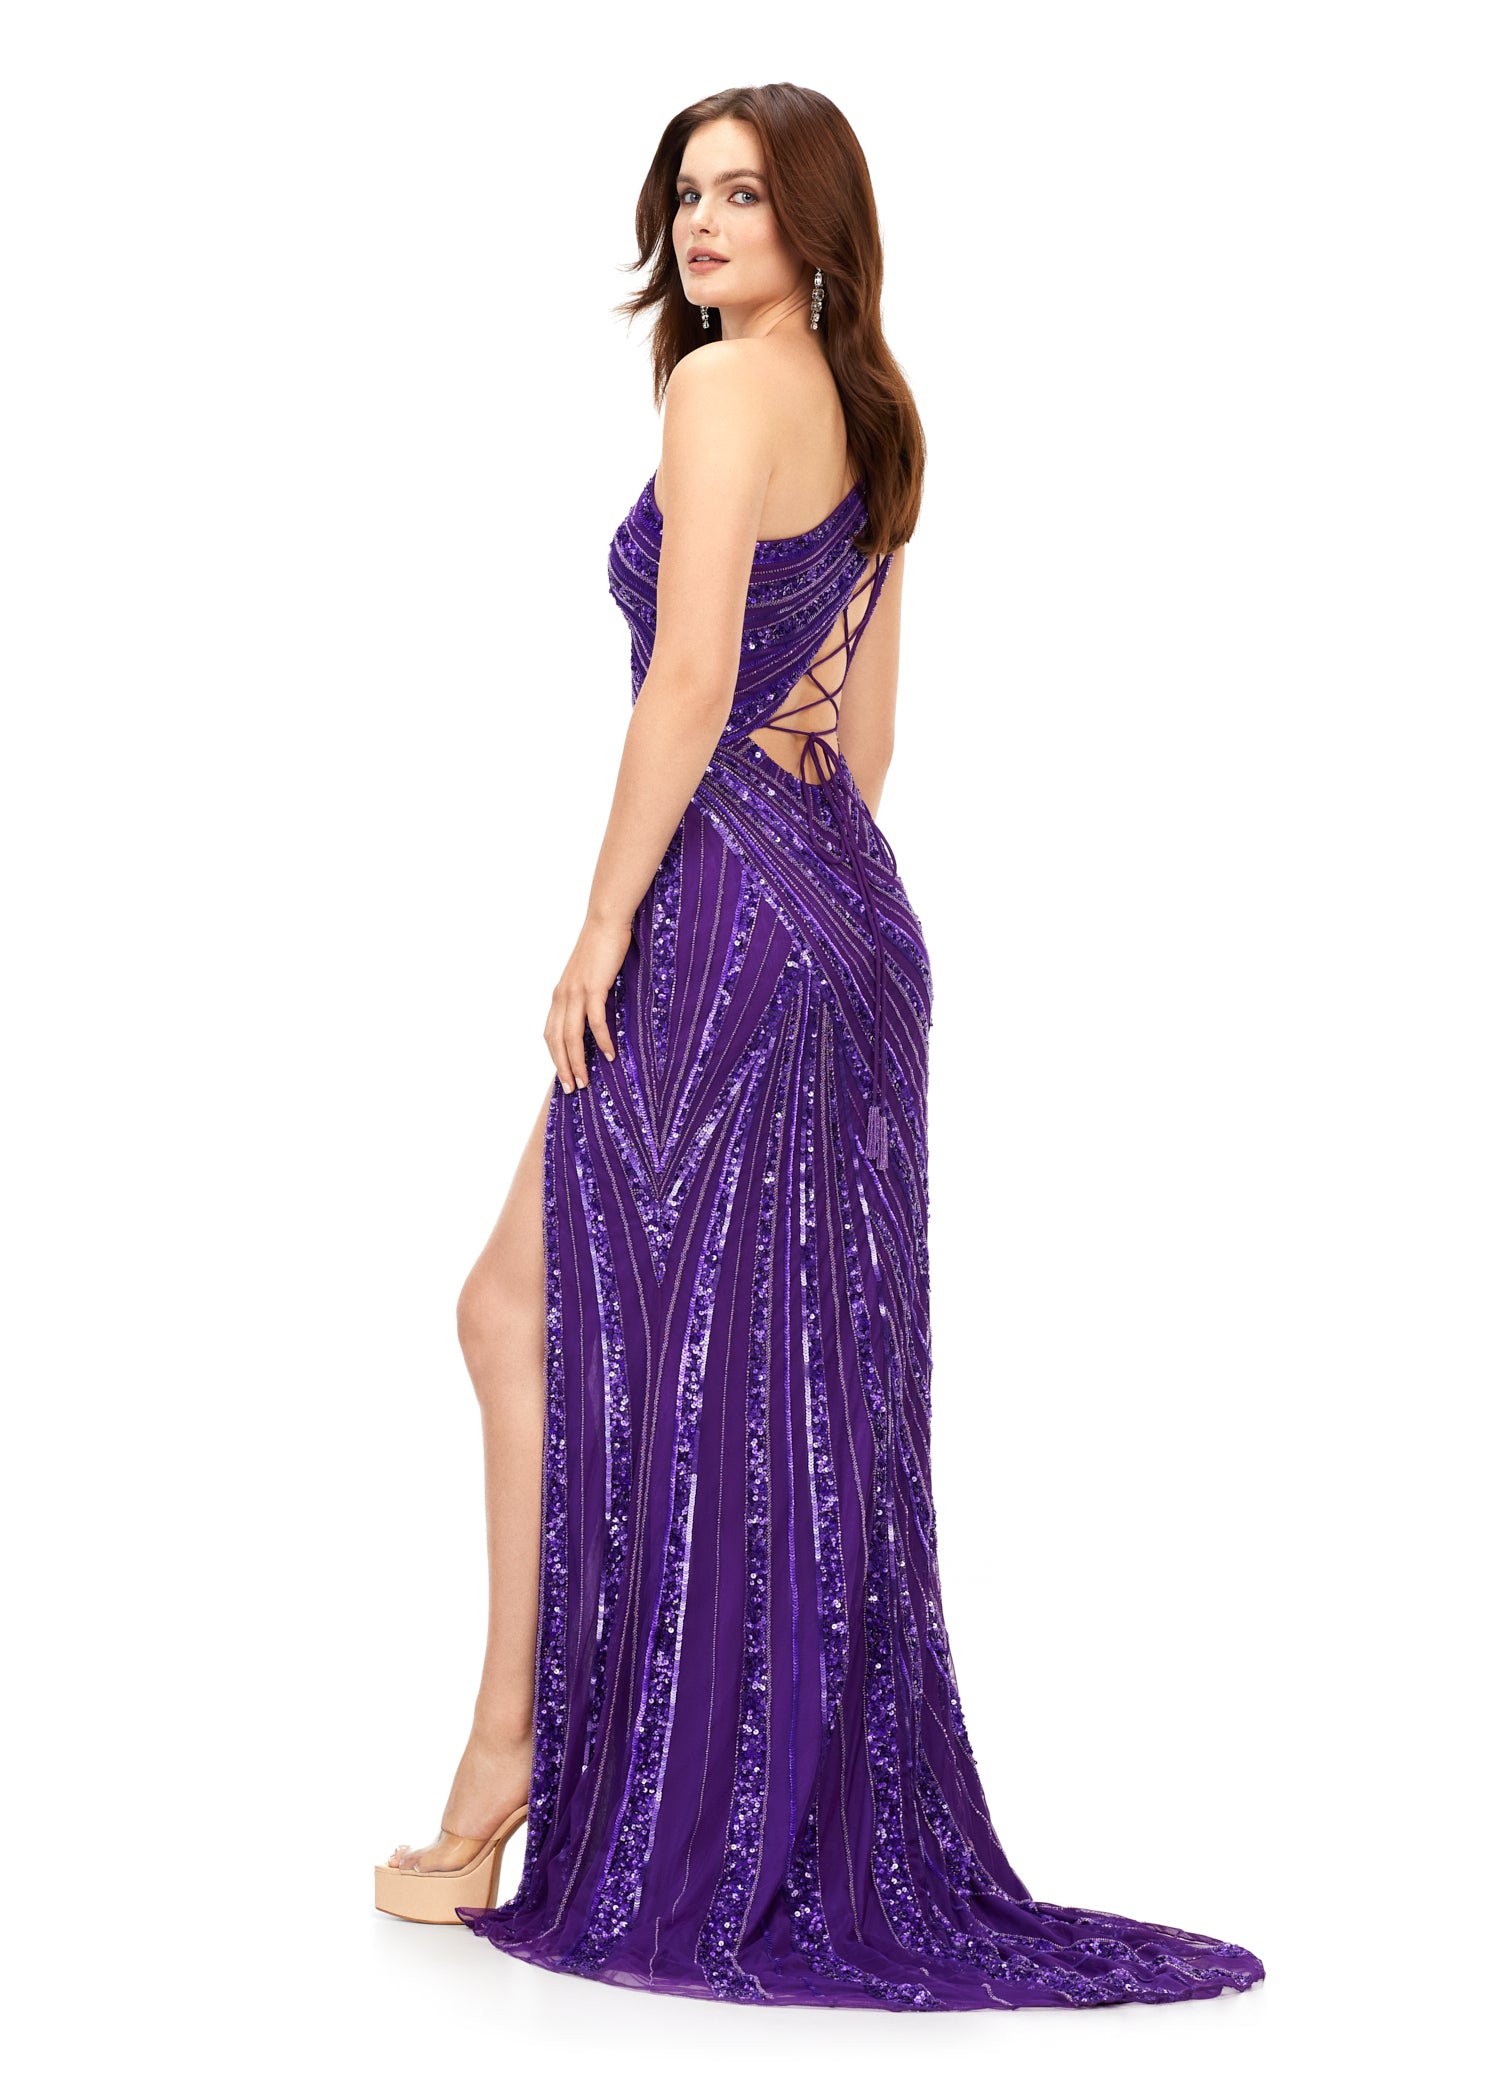 Ashley Lauren 11244 Long Sequin One Shoulder Prom Dress Formal Slit Gown Corset  This one shoulder gown features an intricate bead pattern that will accentuate your curves. The look is complete with a left leg slit and our signature asymmetrical lace up back. One Shoulder Lace Up Back Left Leg Slit Fully Hand Beaded Sizes: 00-18 Colors:  Purple, Neon Blue, AB/Ivory, Royal/Turquoise, Electric Coral, Jade, Neon Pink, Orchid